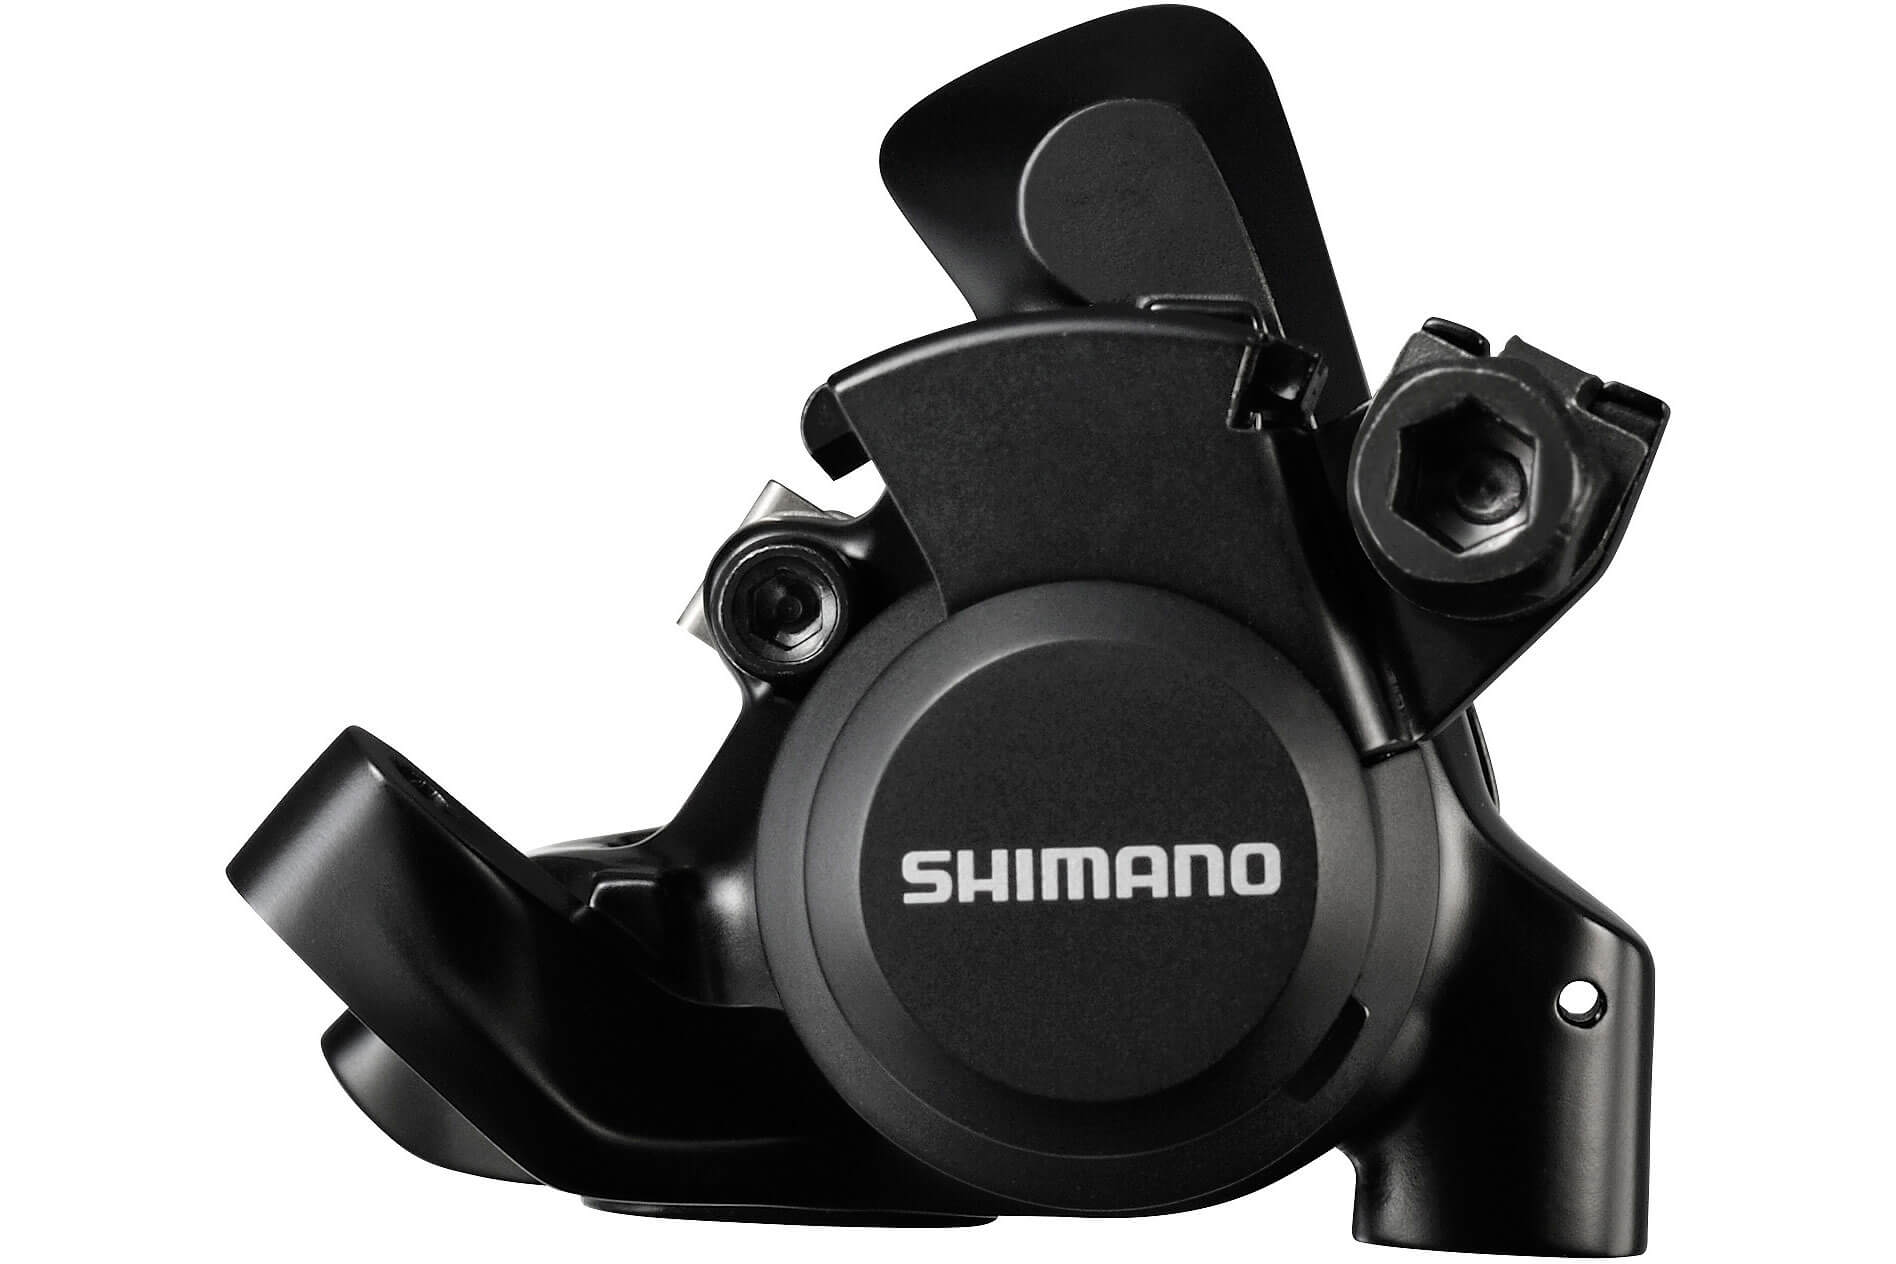 Shimano Grx St-rx810/brrx810 11-speed